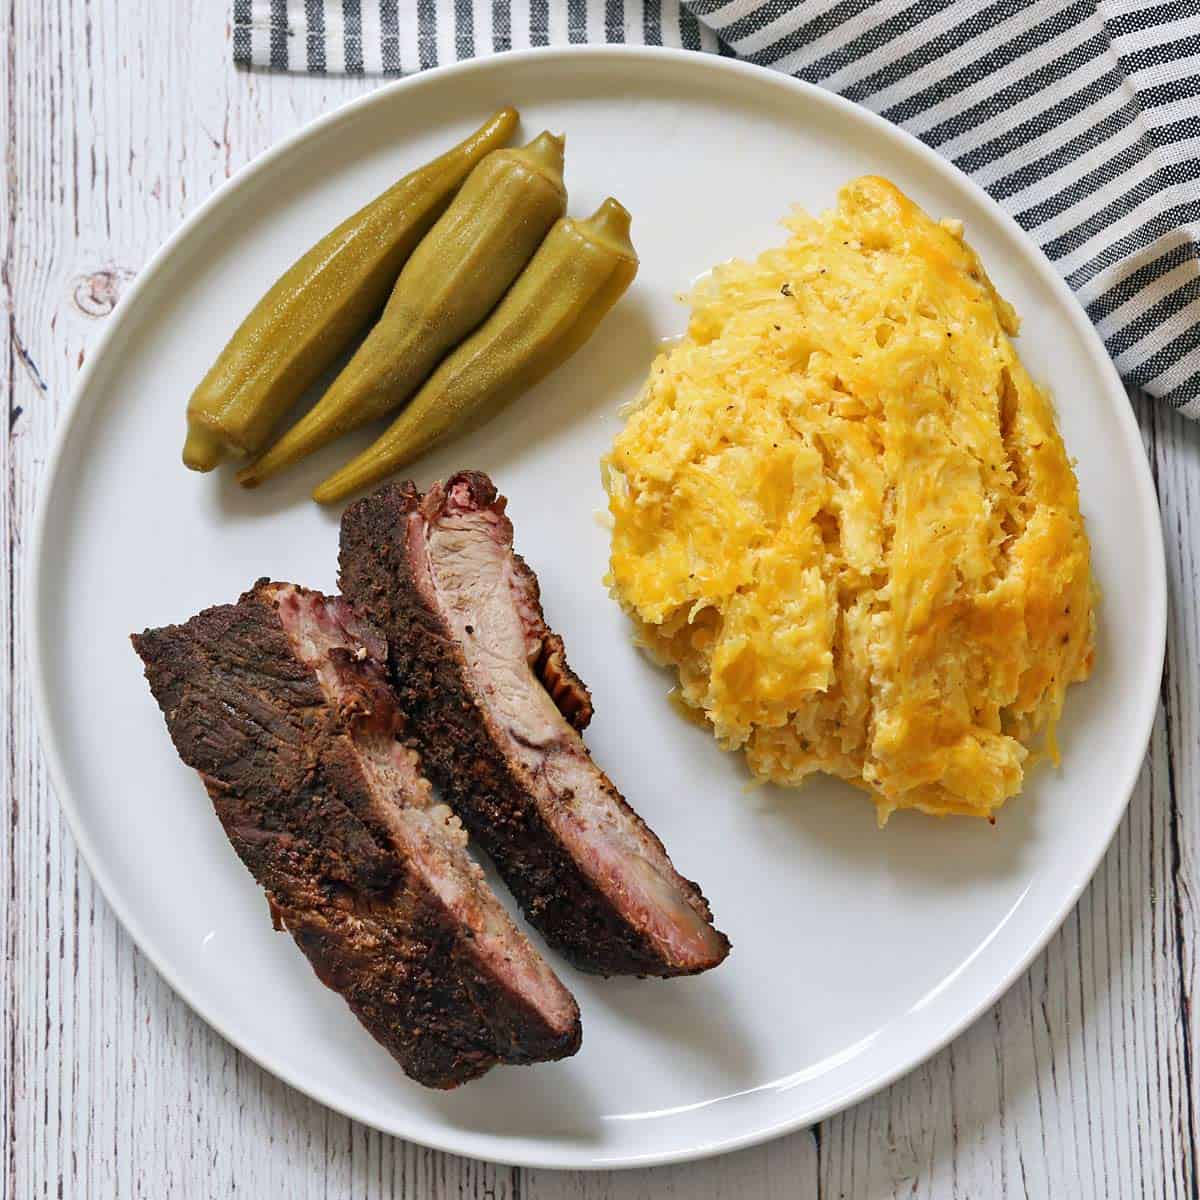 Spaghetti squash casserole is served with pork spare ribs and pickled okra.